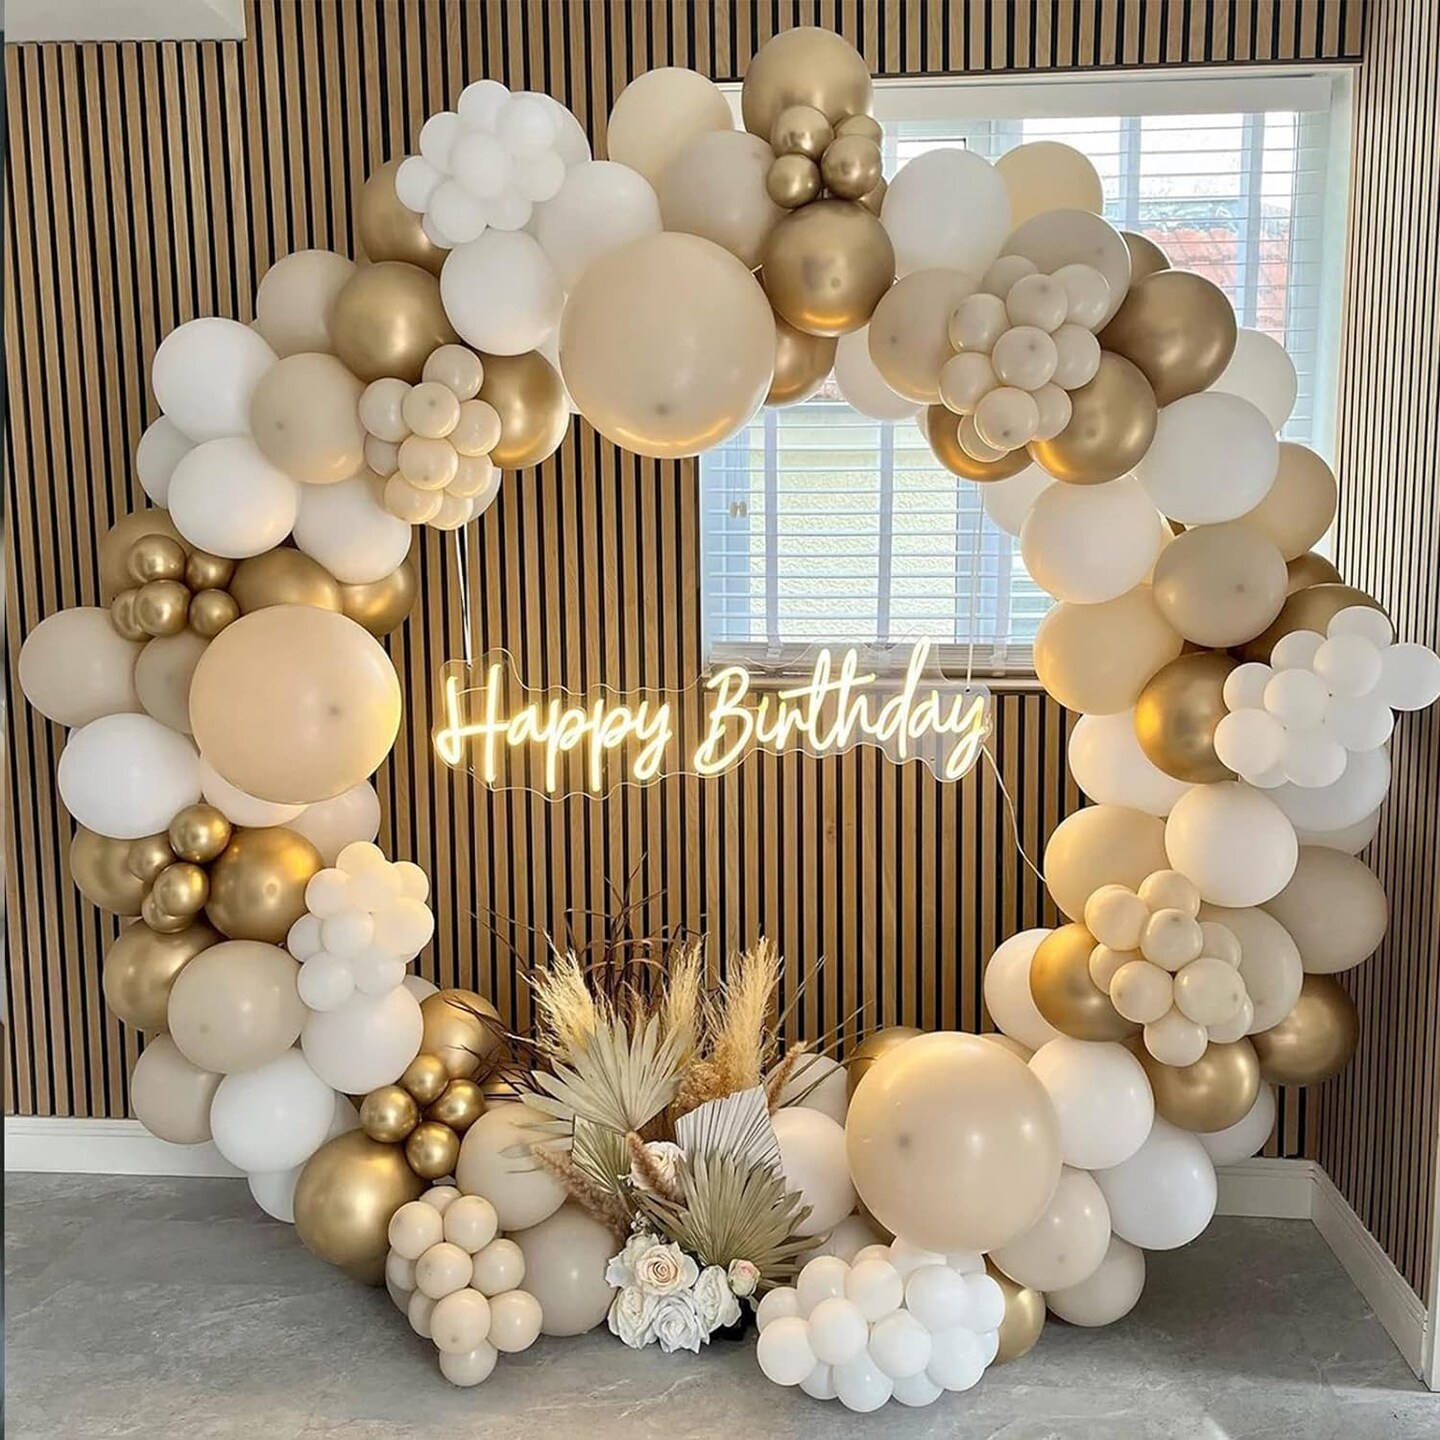 White Sand Gold Balloons Garland Arch Kit,156PCS White Nude Balloons with Metallic Chrome Gold Latex Balloons for Boho Wedding Baby Bridal Shower Engagement Anniversary Birthday Decorations Backdrop